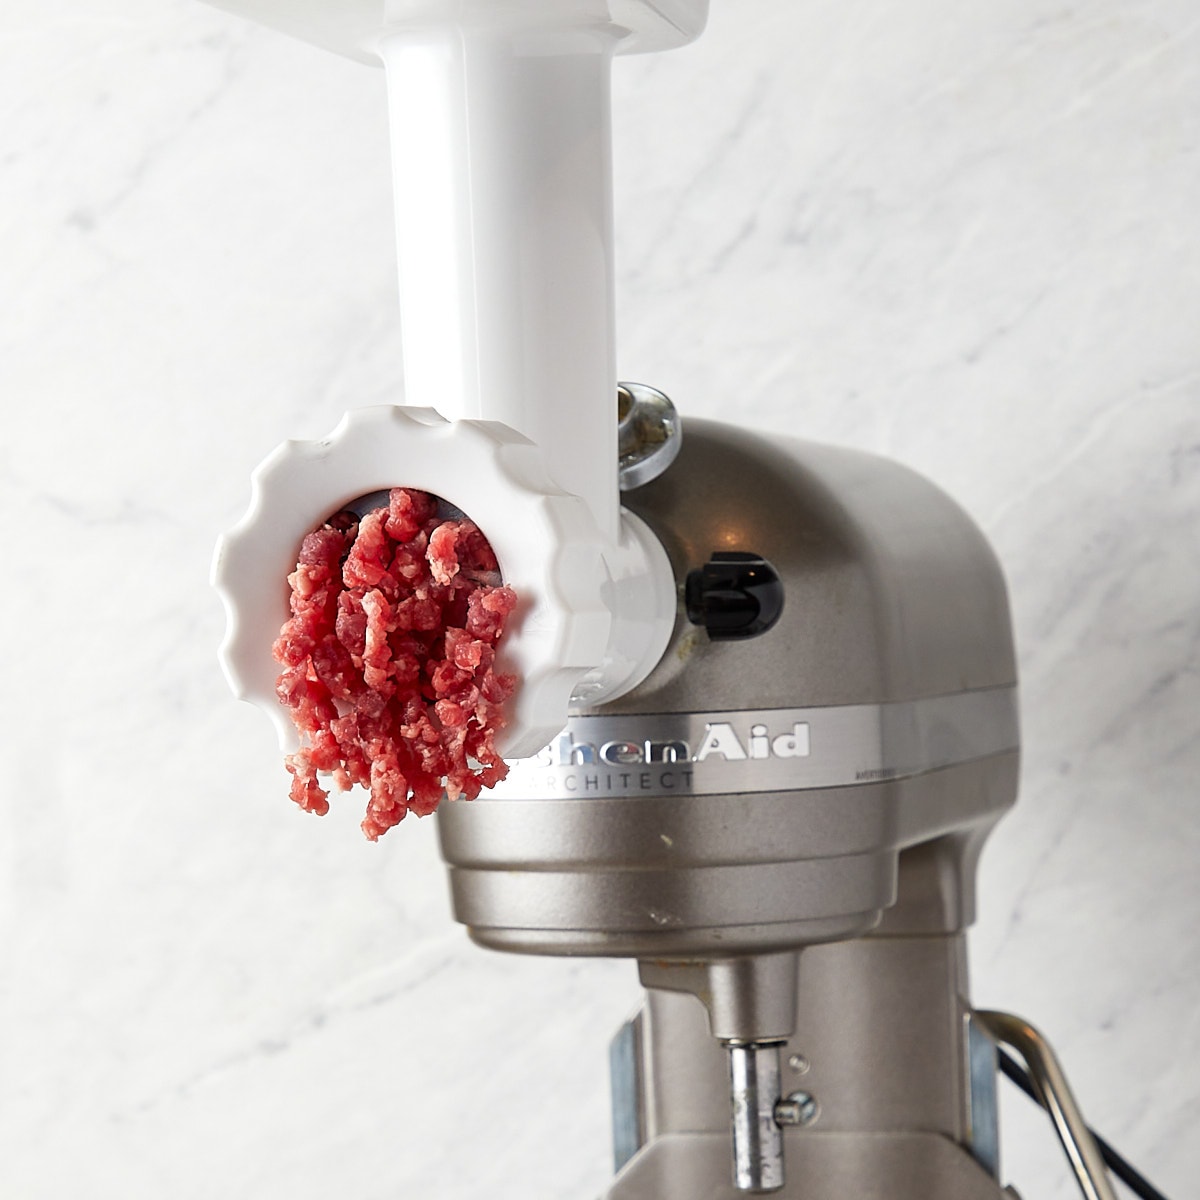 beef being ground in a kitchen-aid food process with a grinder attachment.